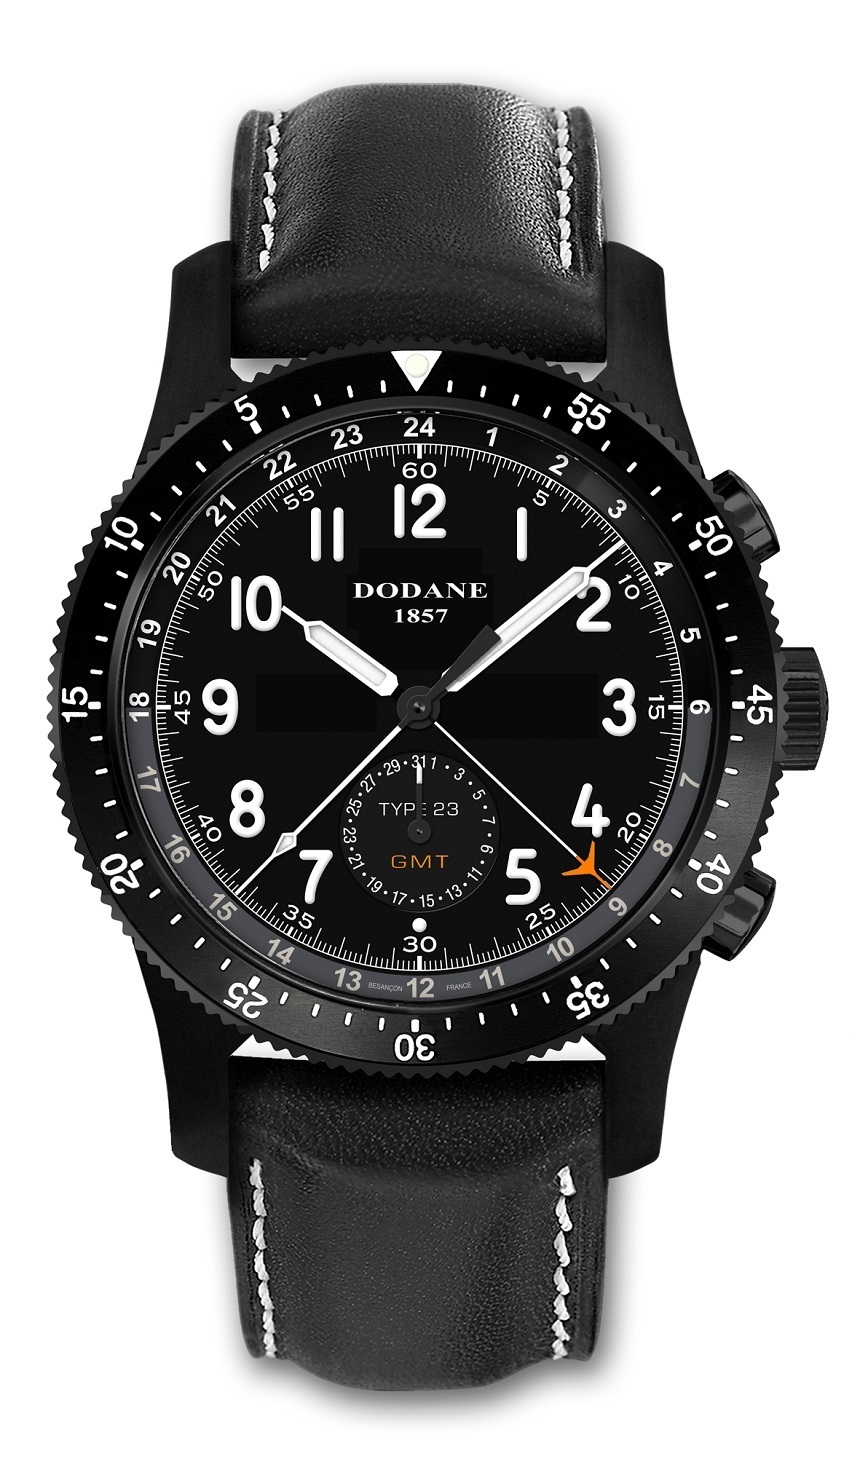 Dodane Type 23 Watches For 2015 Watch Releases 